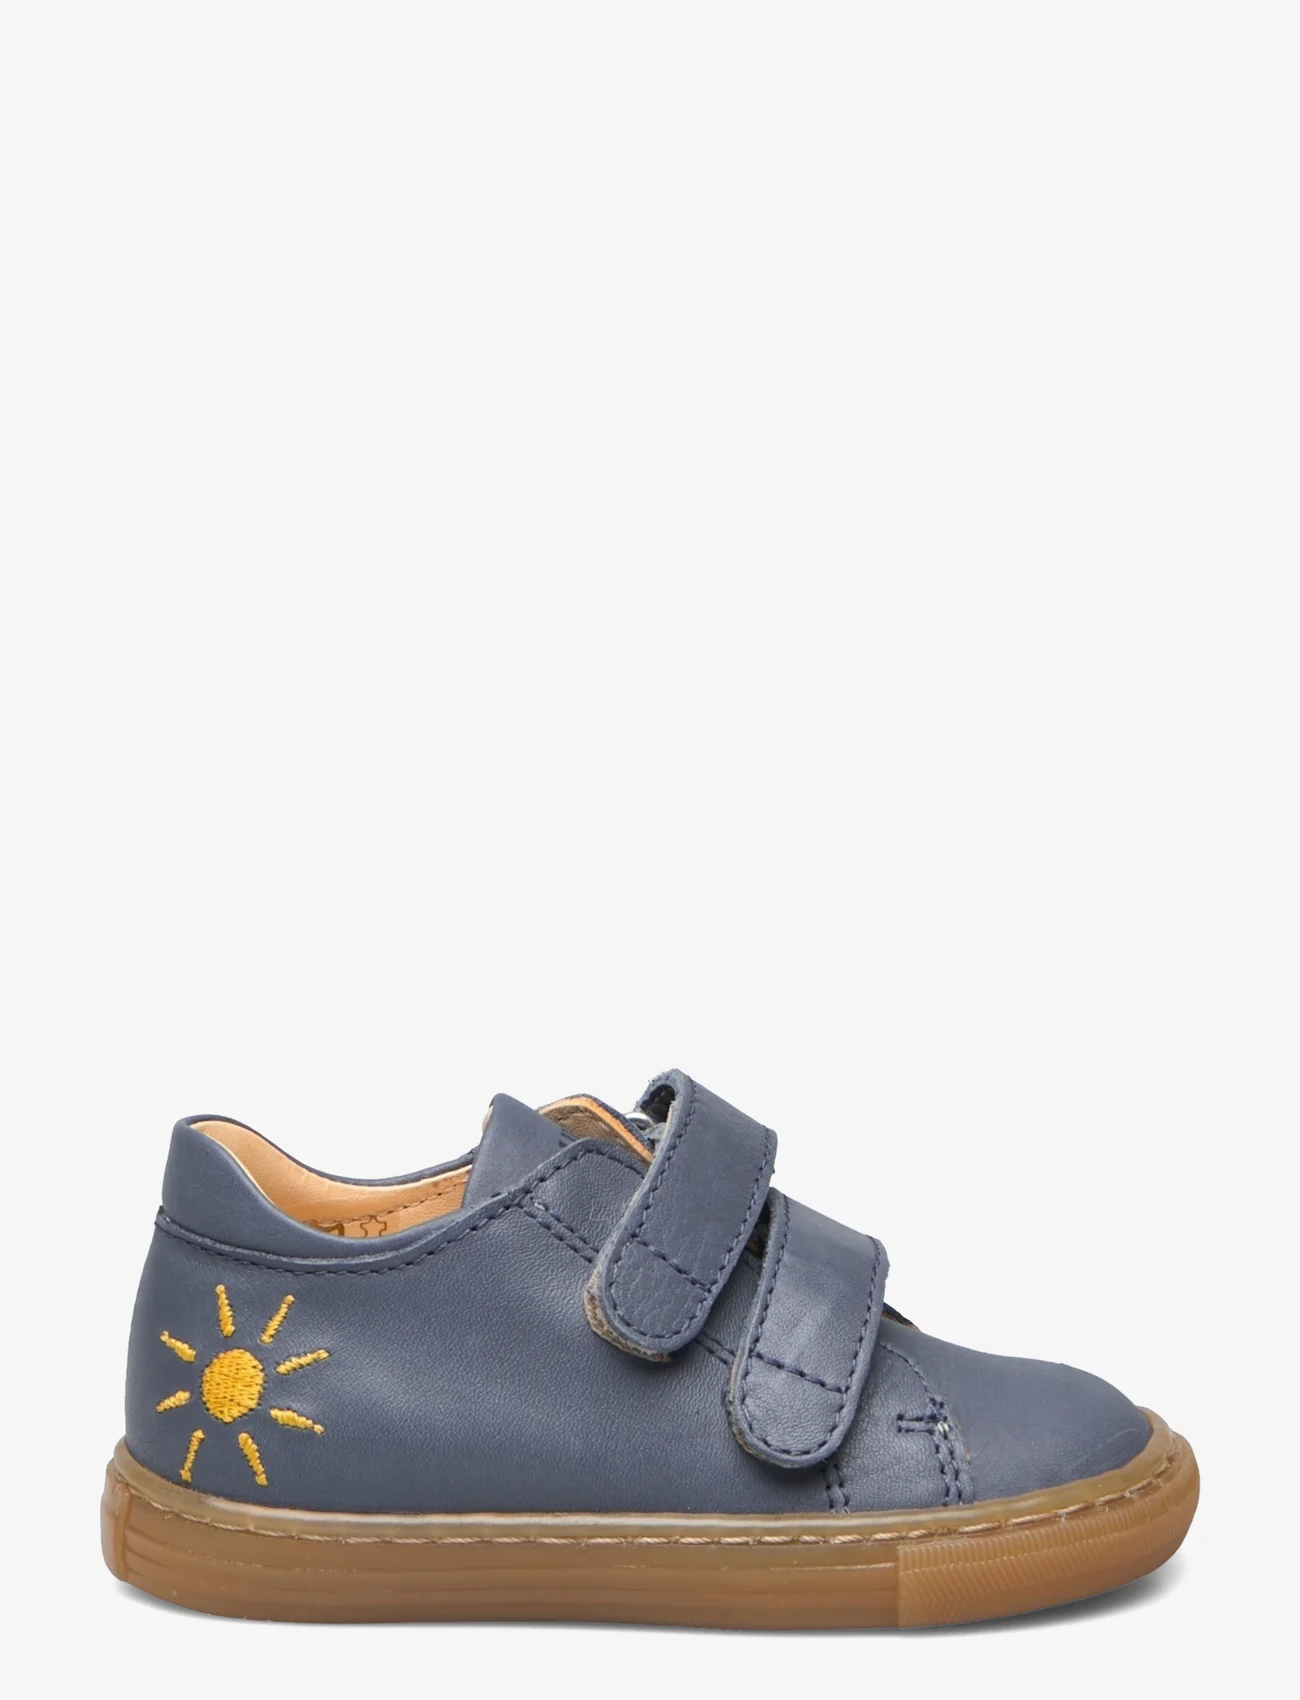 ANGULUS - Shoes - flat - with velcro - sommarfynd - 2715 blue fog - 1